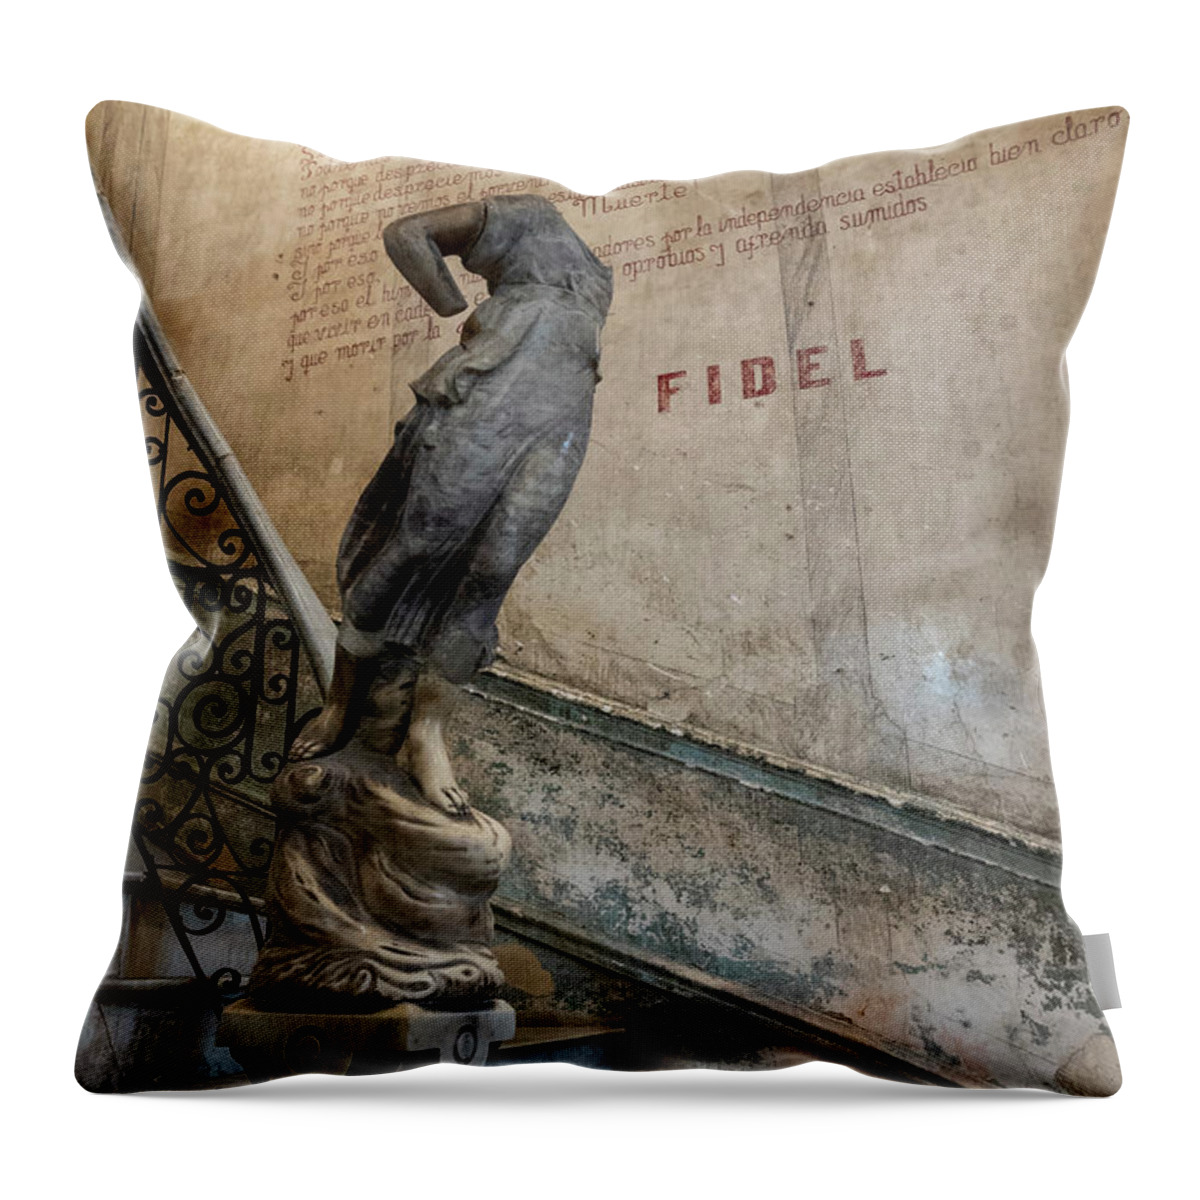 Cuba Throw Pillow featuring the photograph Fidel by Kathryn McBride